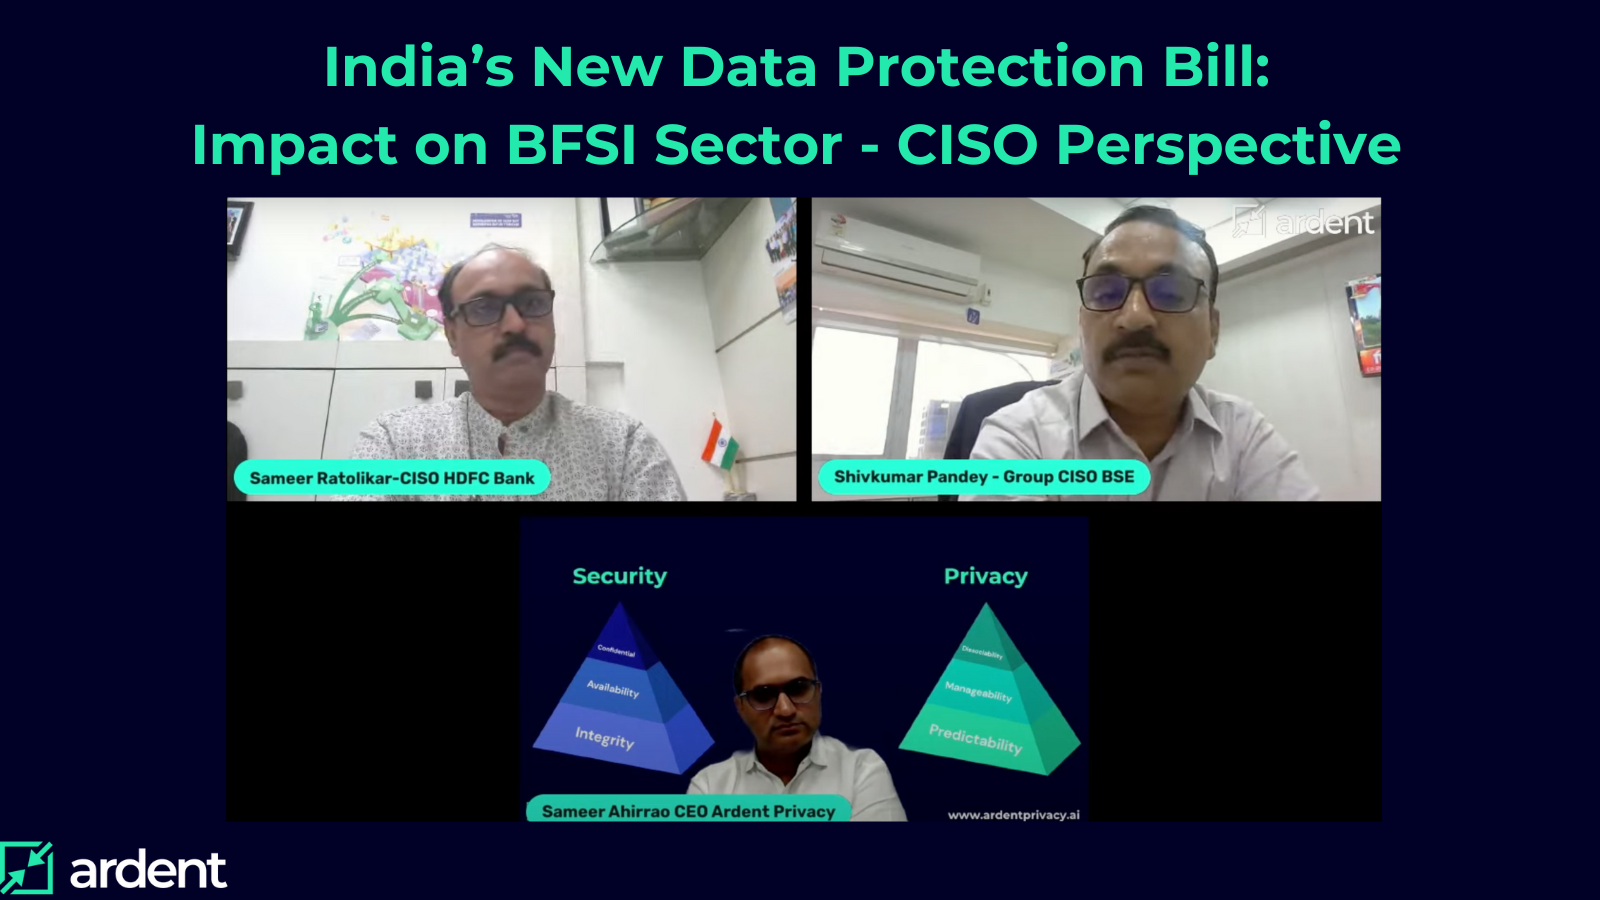 India's New Data Protection Bill: Impact on BFSI Sector - CISO Perspective